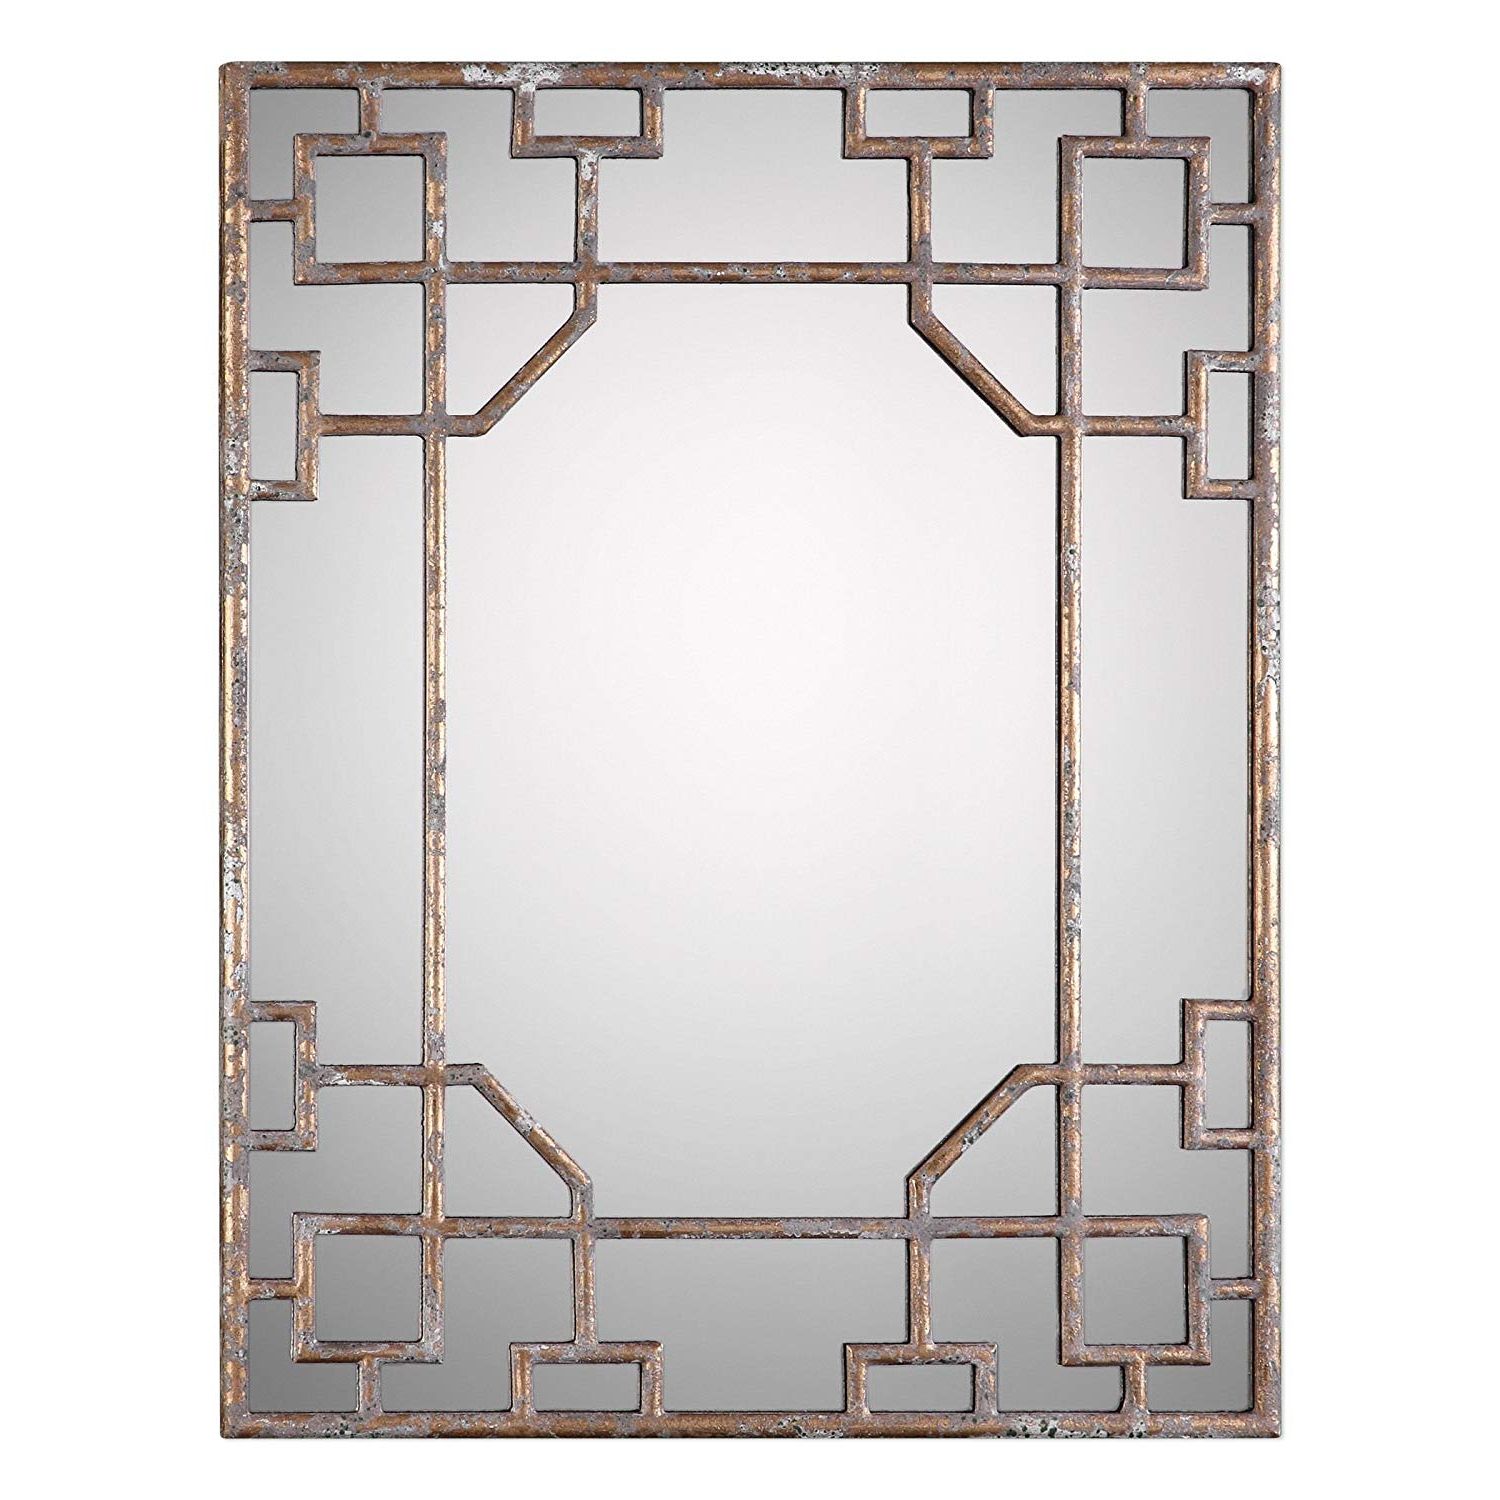 Well Liked Amazon: Asian Fretwork Overlay Wall Mirror (View 6 of 20)